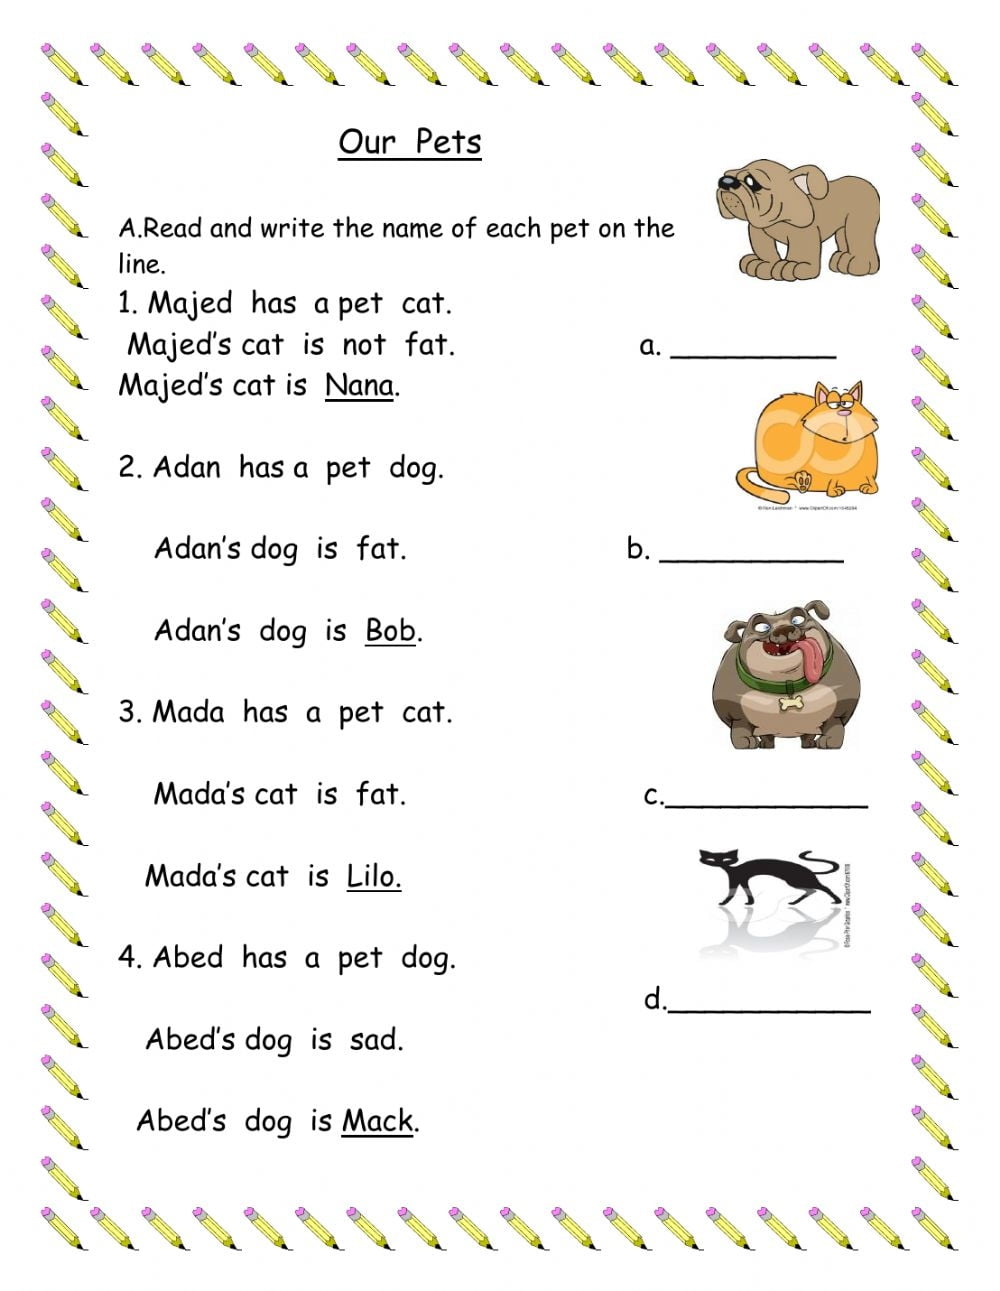 Our Pets Worksheet